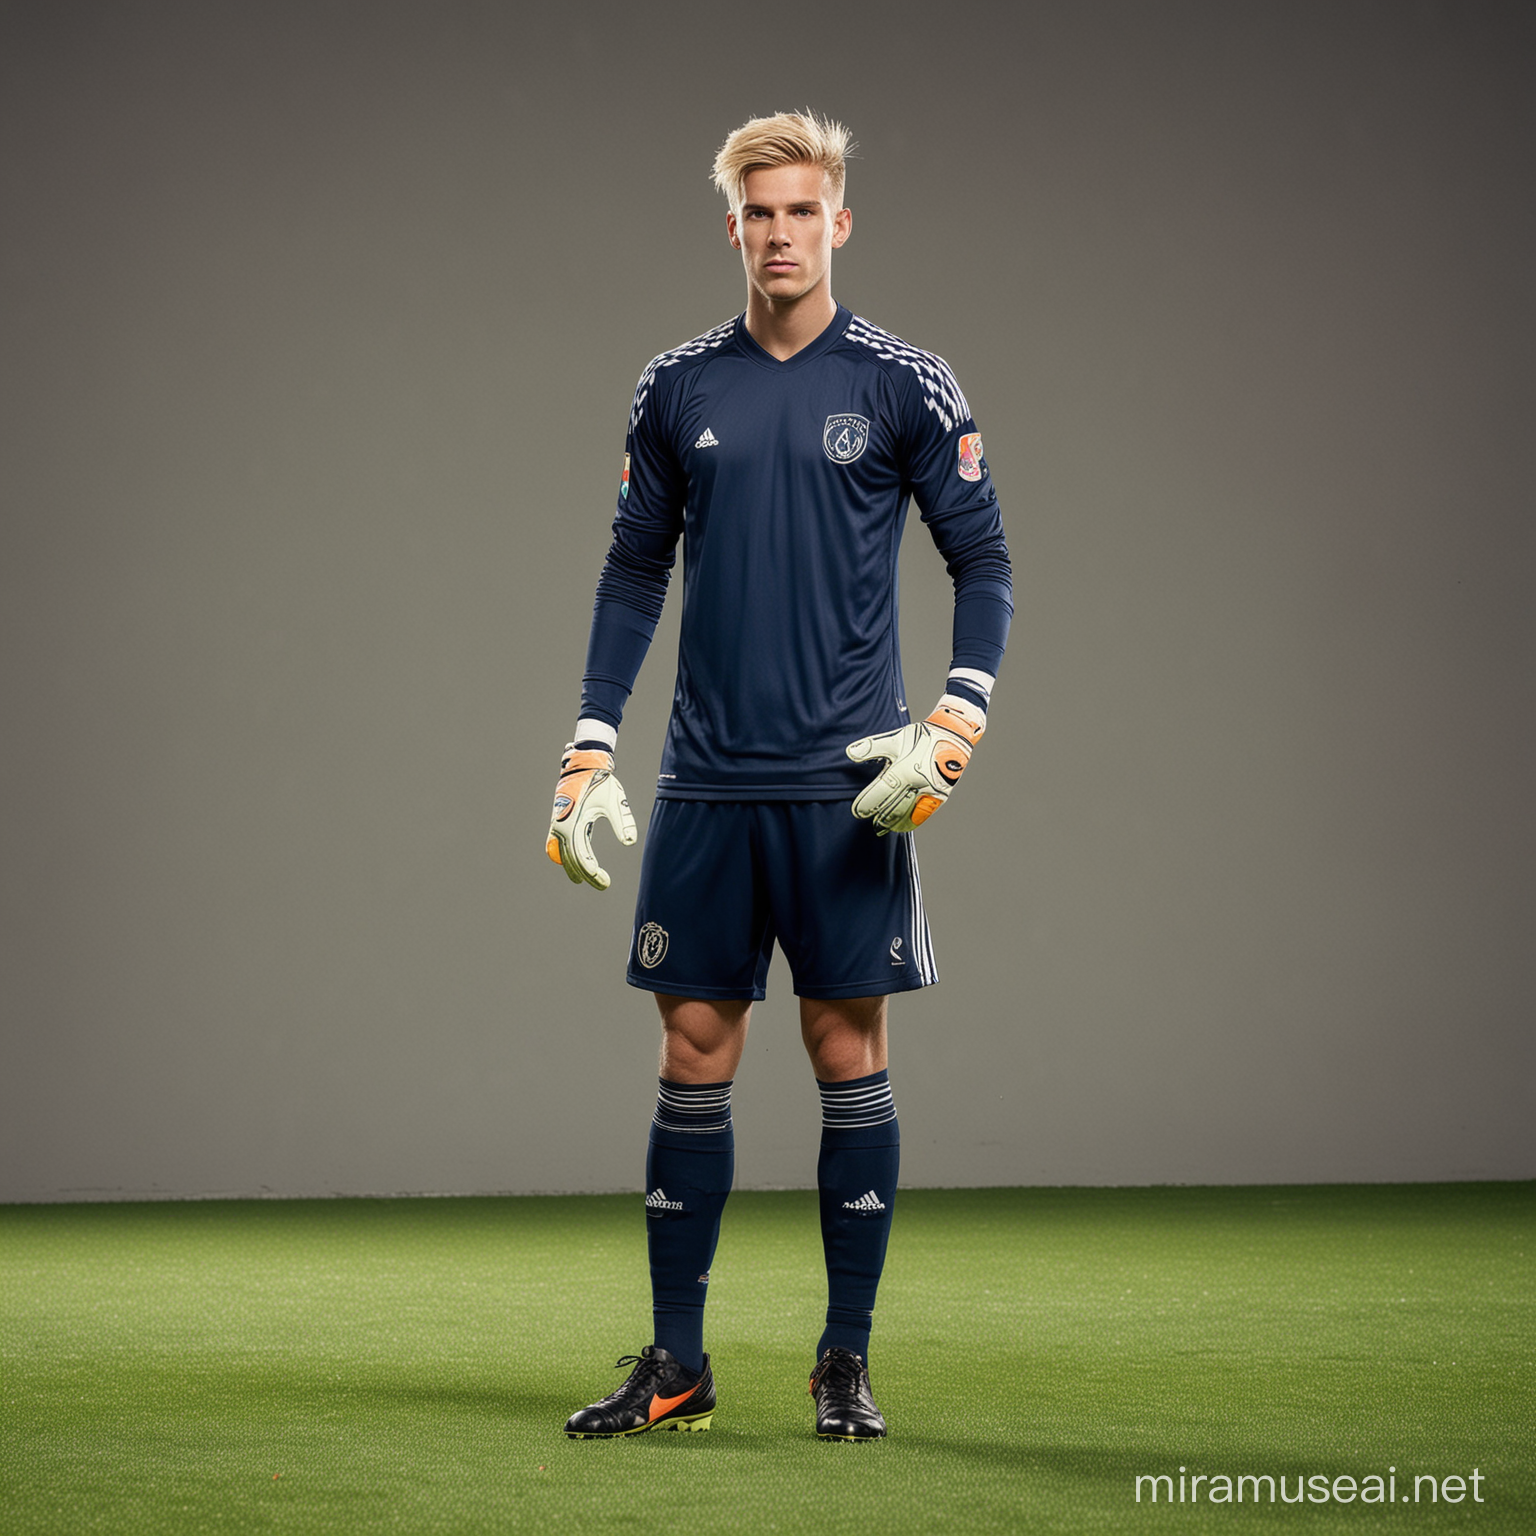 Solo Soccer Goalkeeper in Navy Blue Kit and Black Boots